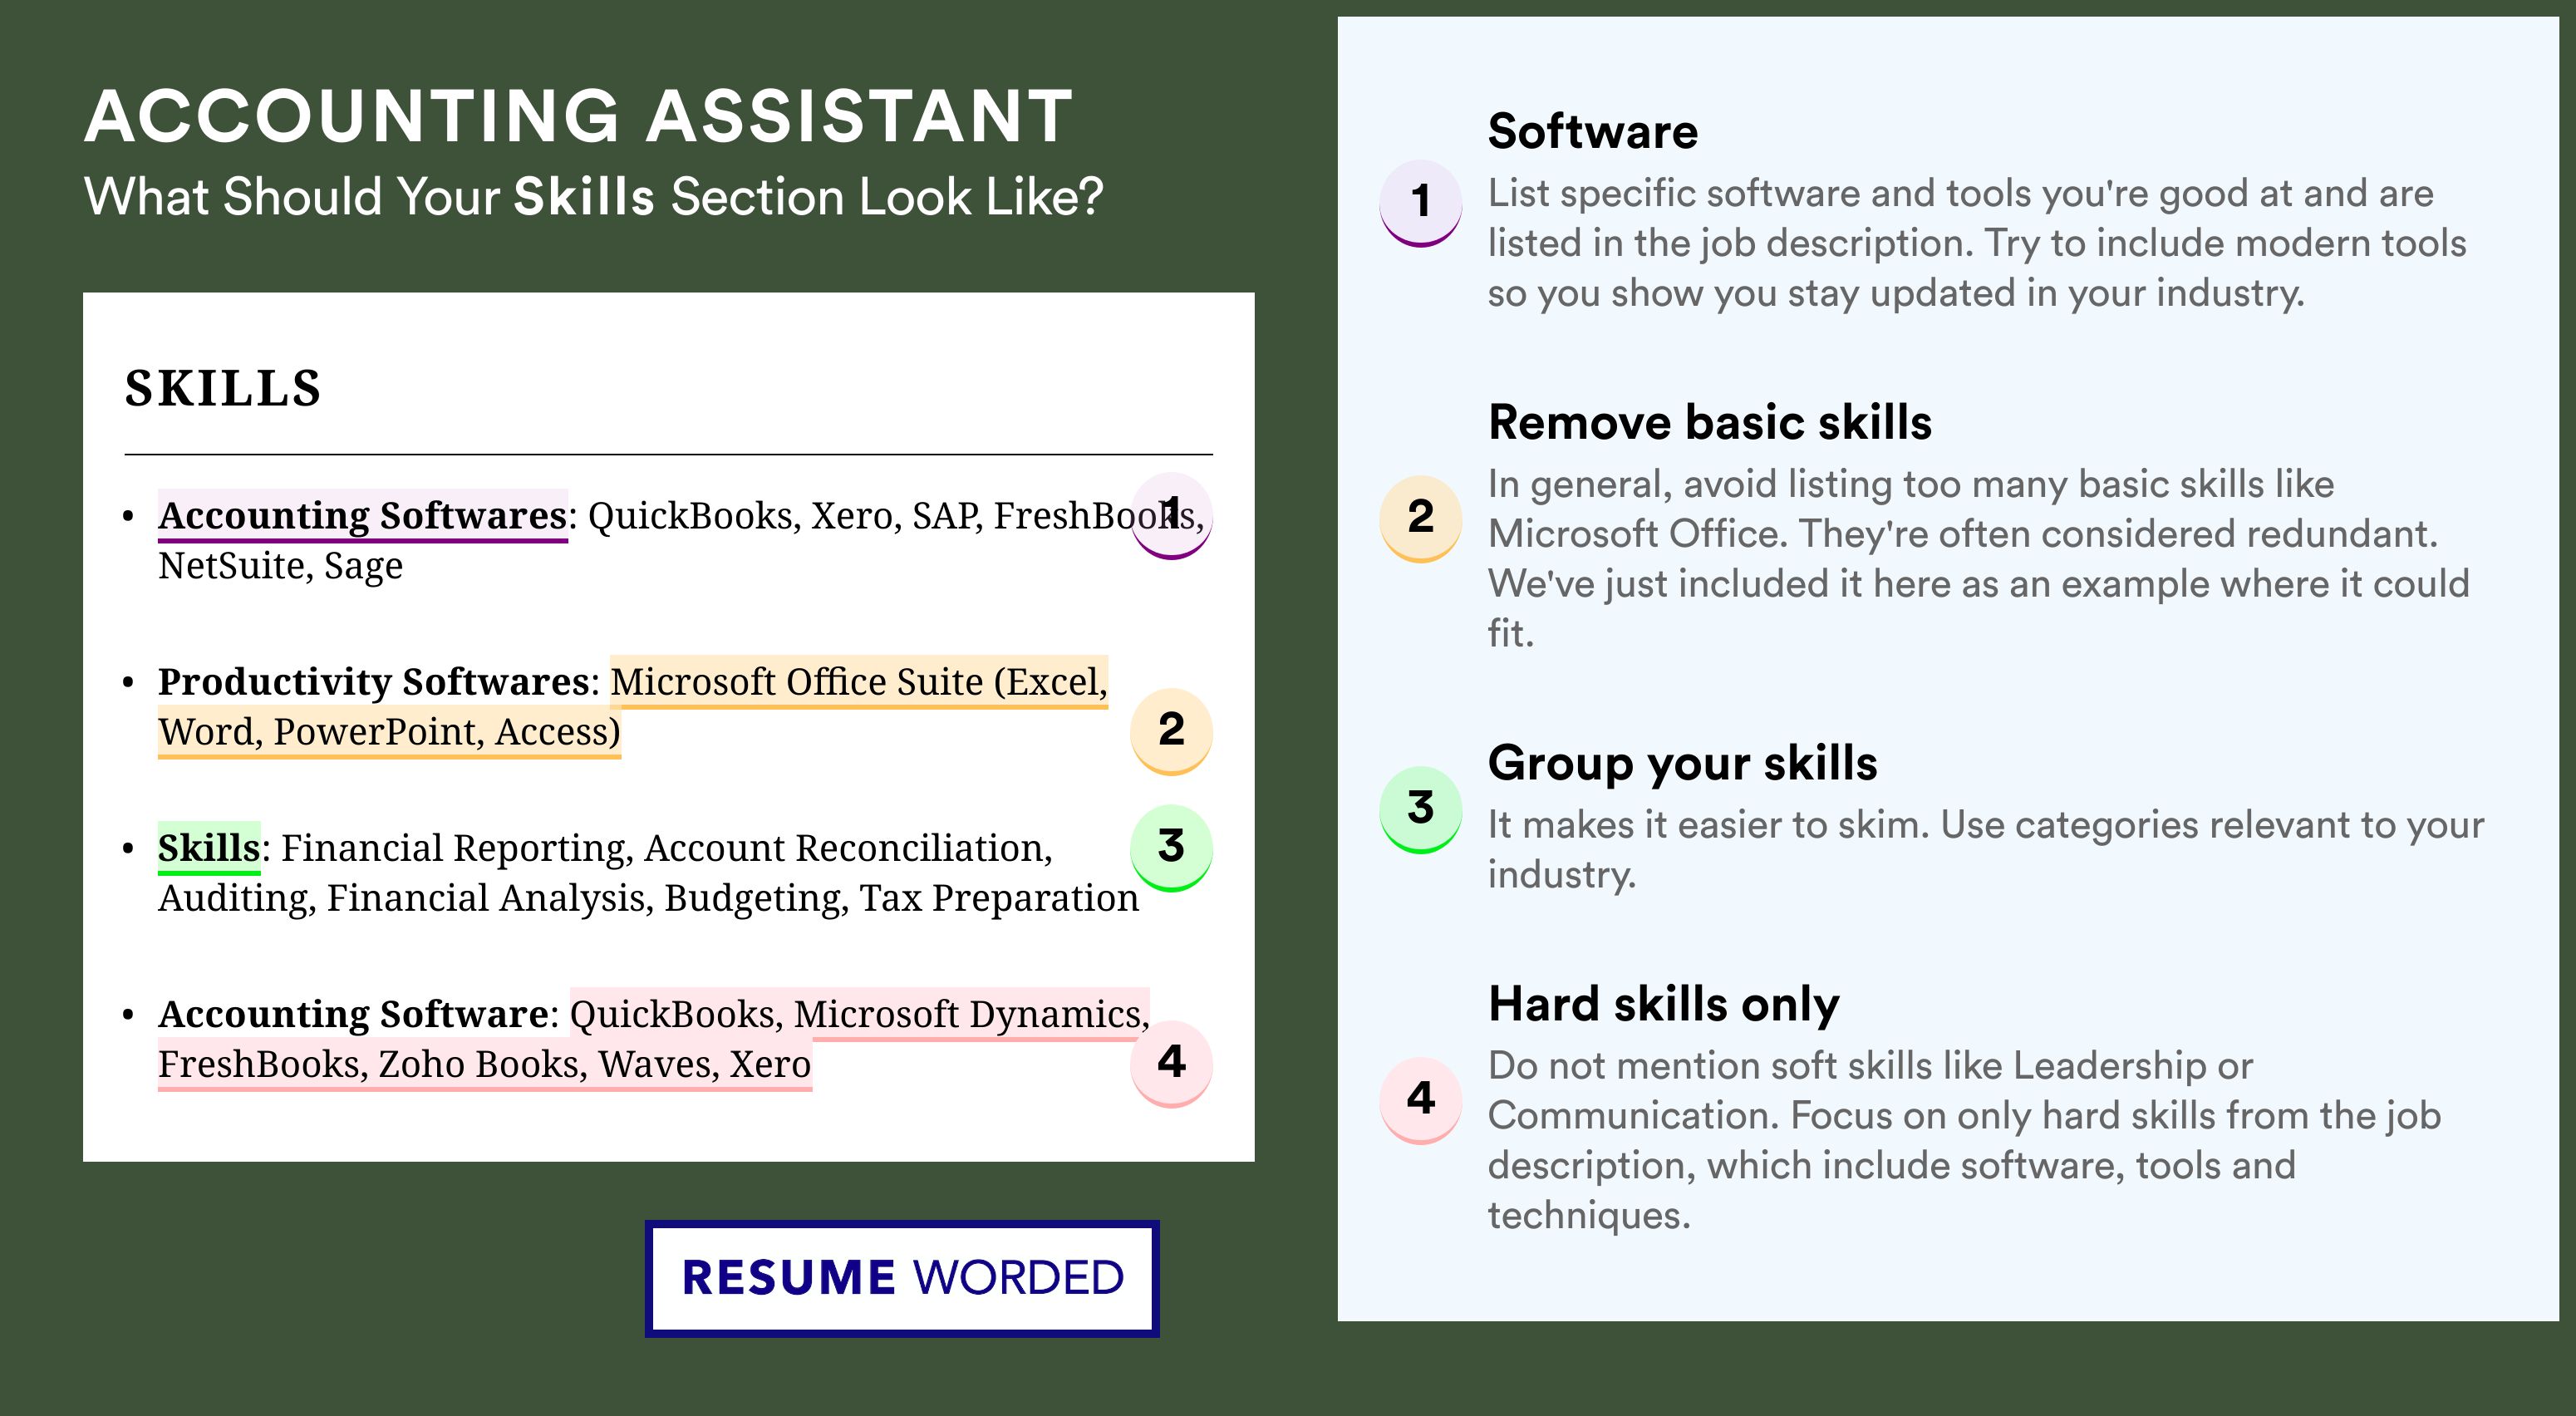 How To Write Your Skills Section - Accounting Assistant Roles